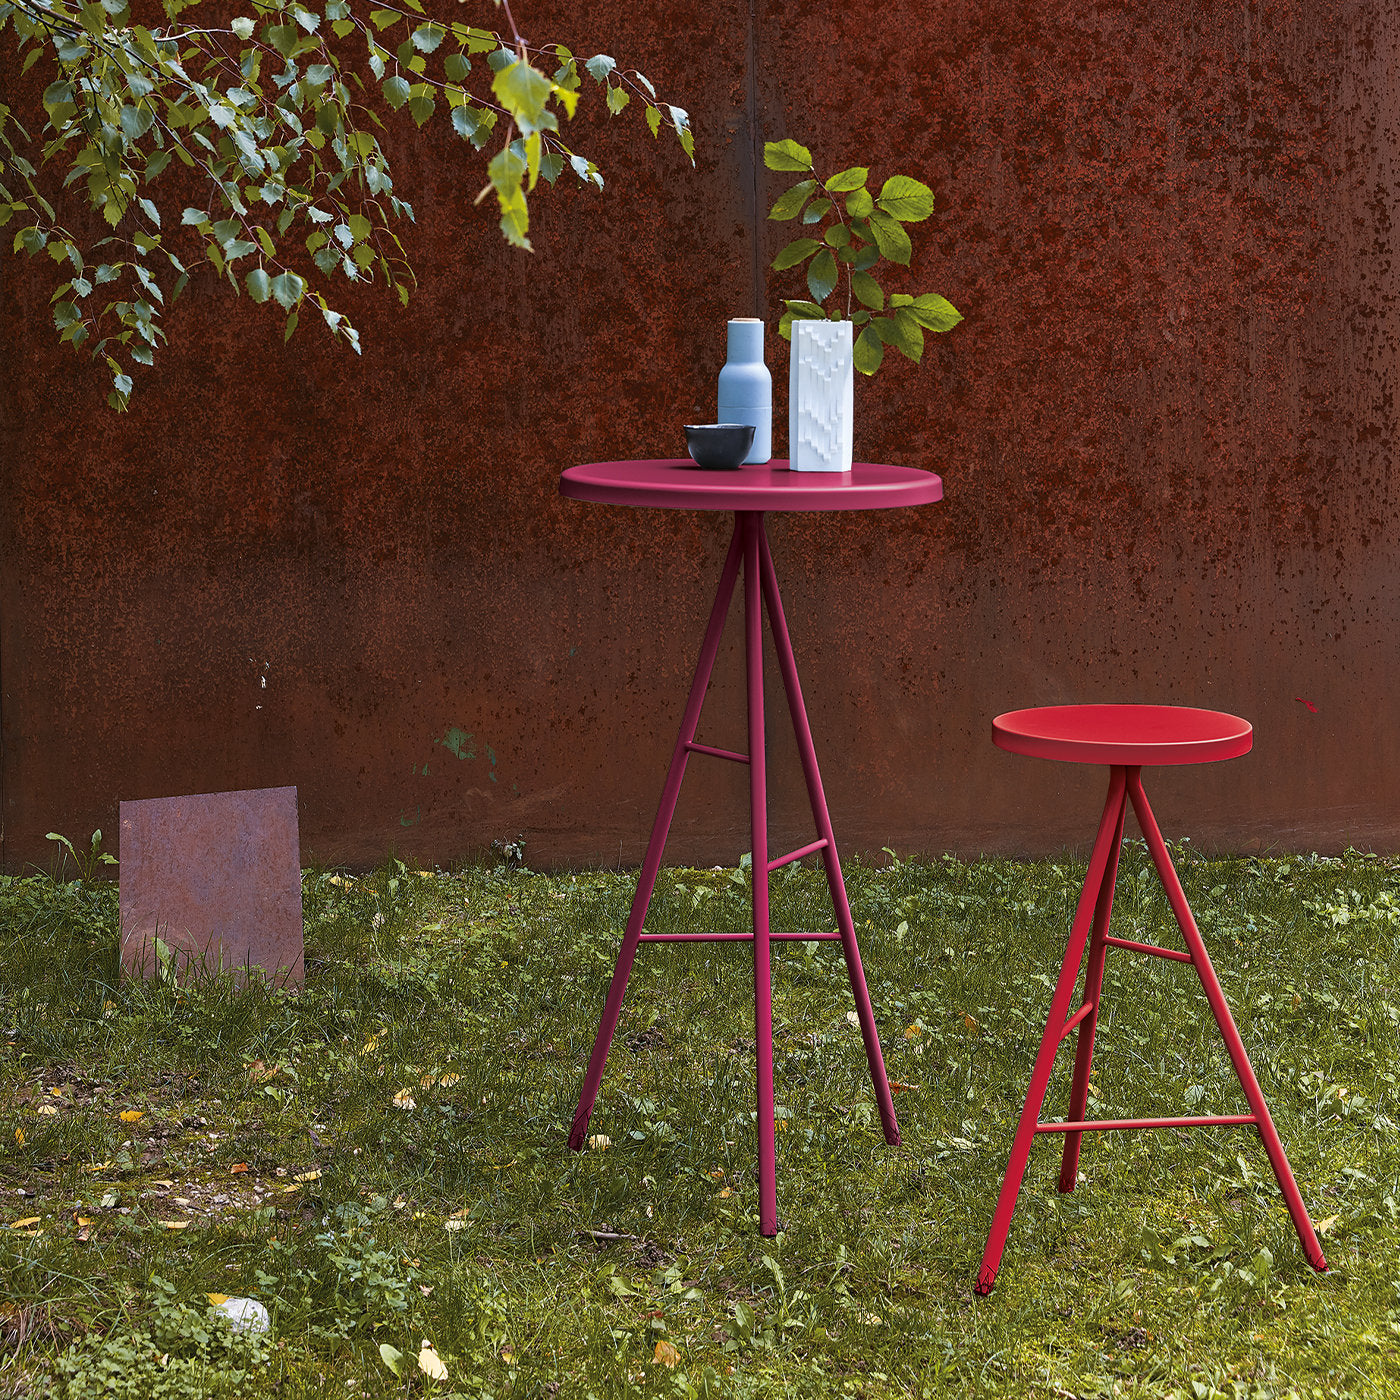 Symple Tall Pink Stool - Alternative view 1